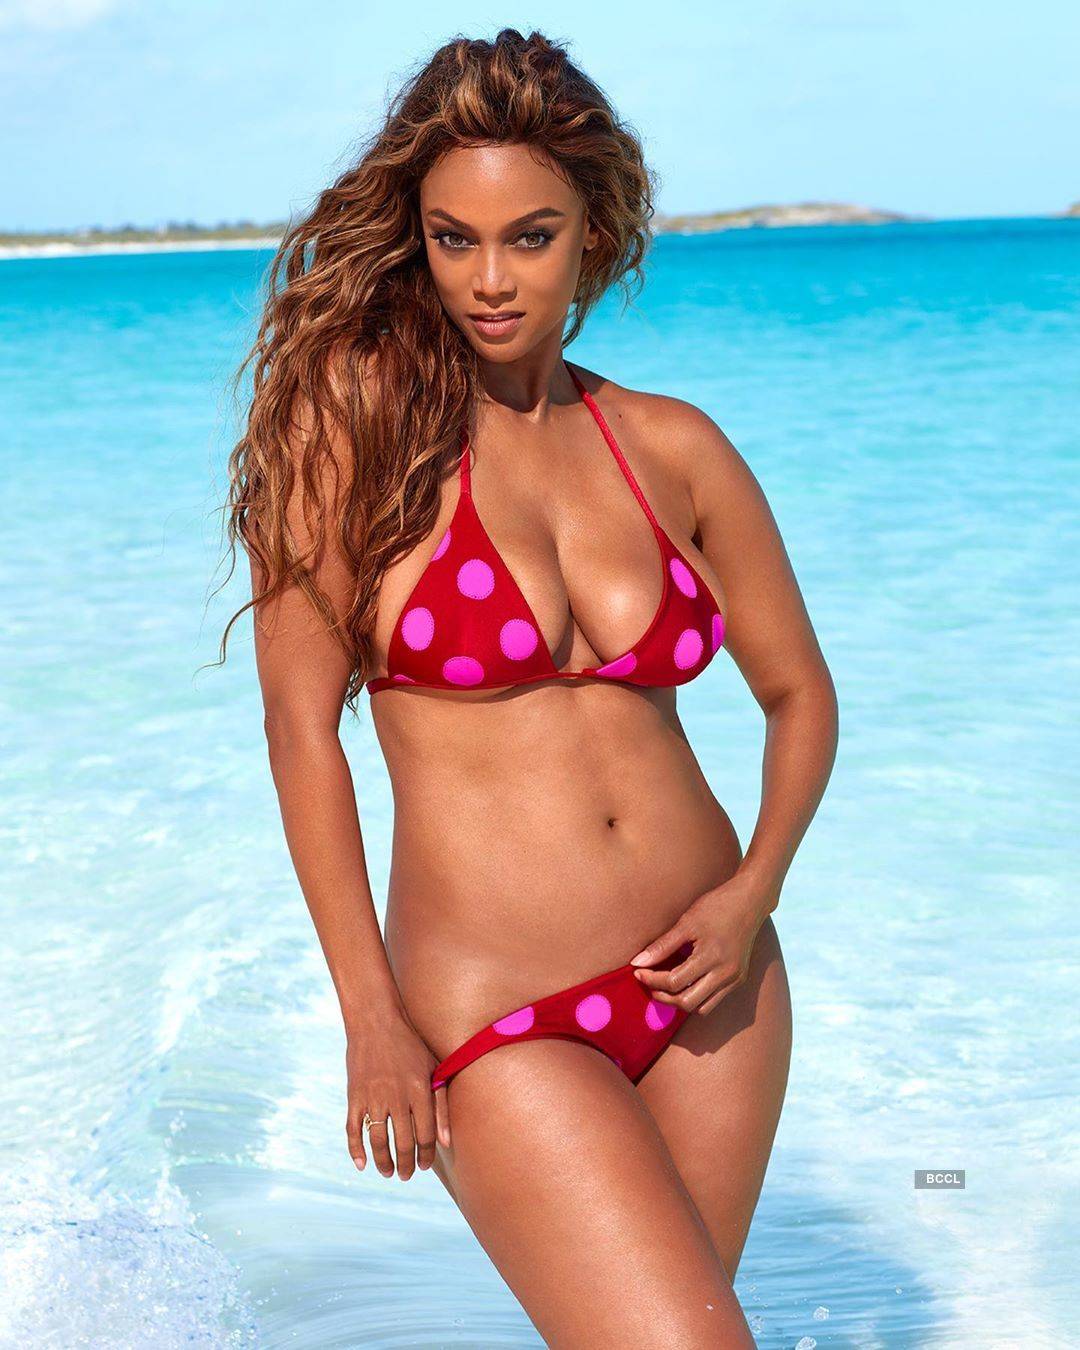 Tyra Banks will set your hearts racing with her glamorous photos